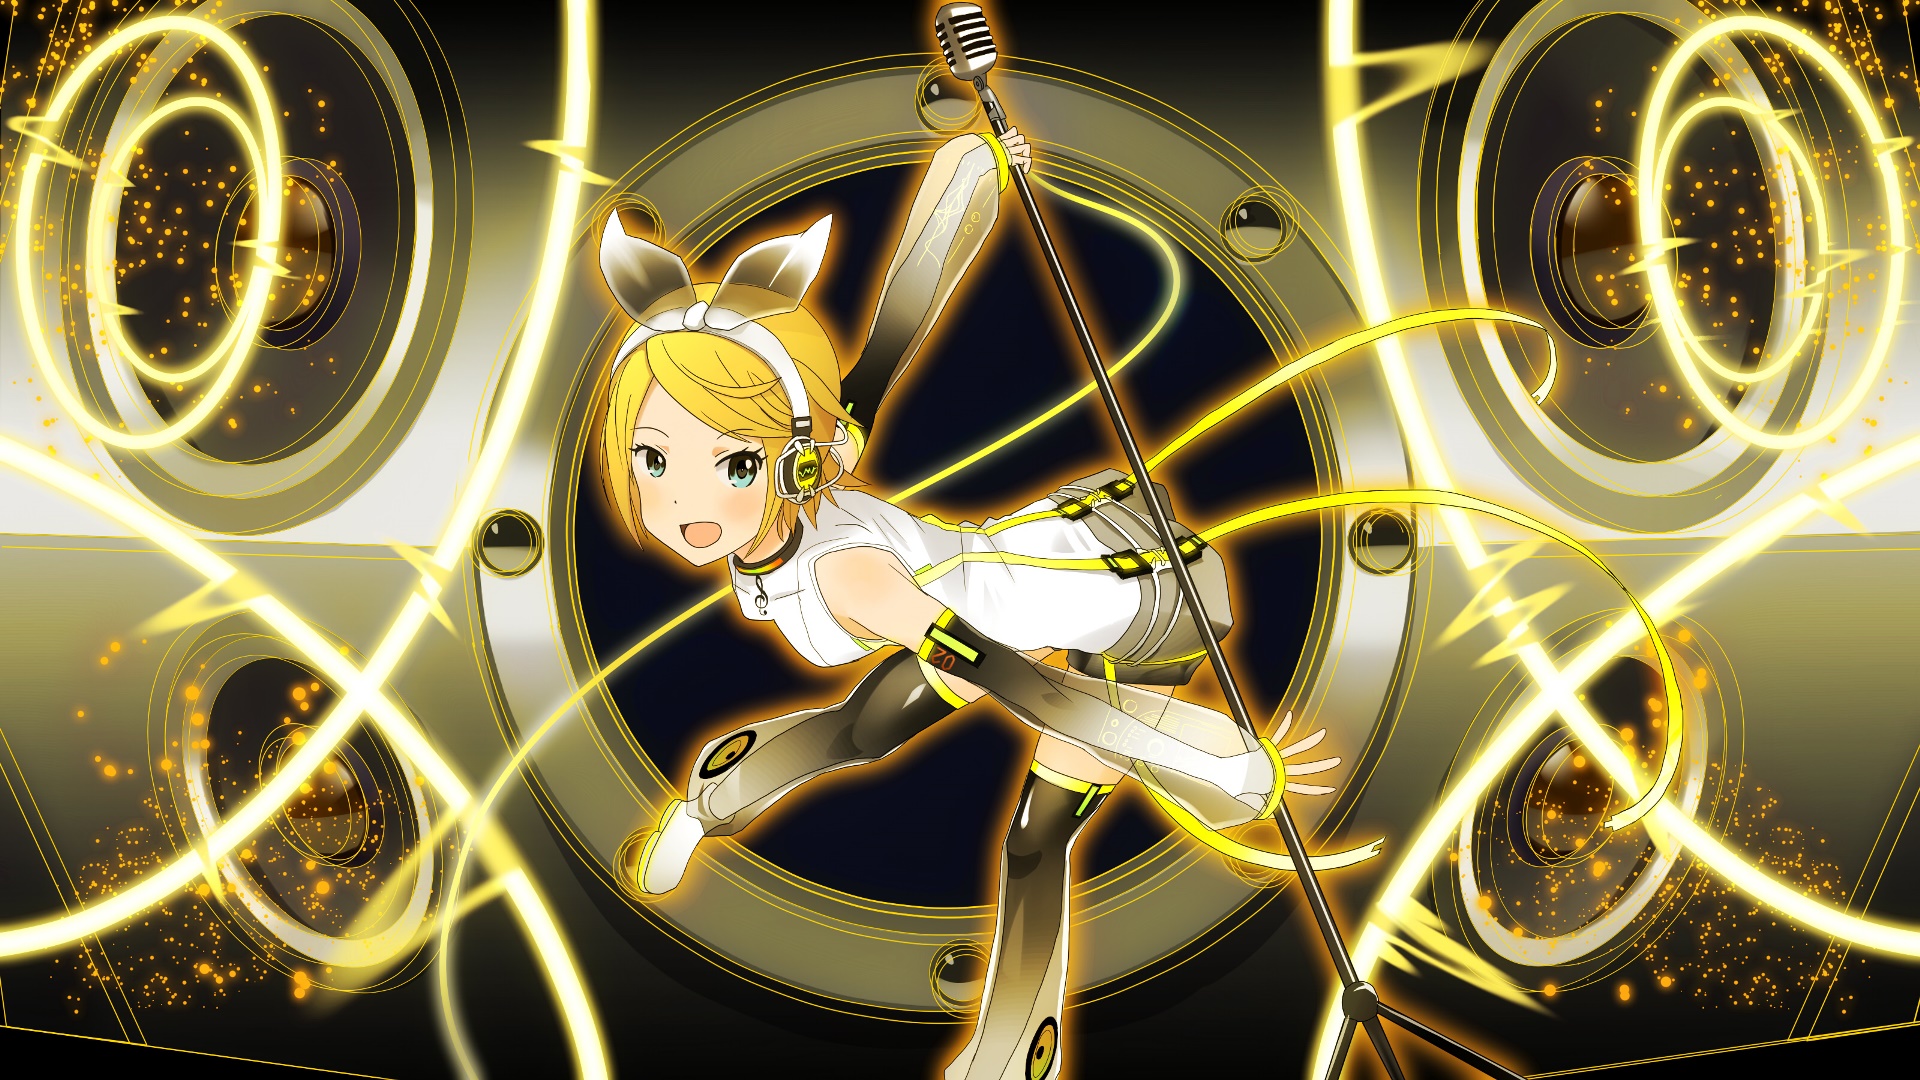 HD desktop wallpaper Anime Vocaloid Rin Kagamine download free picture  794943